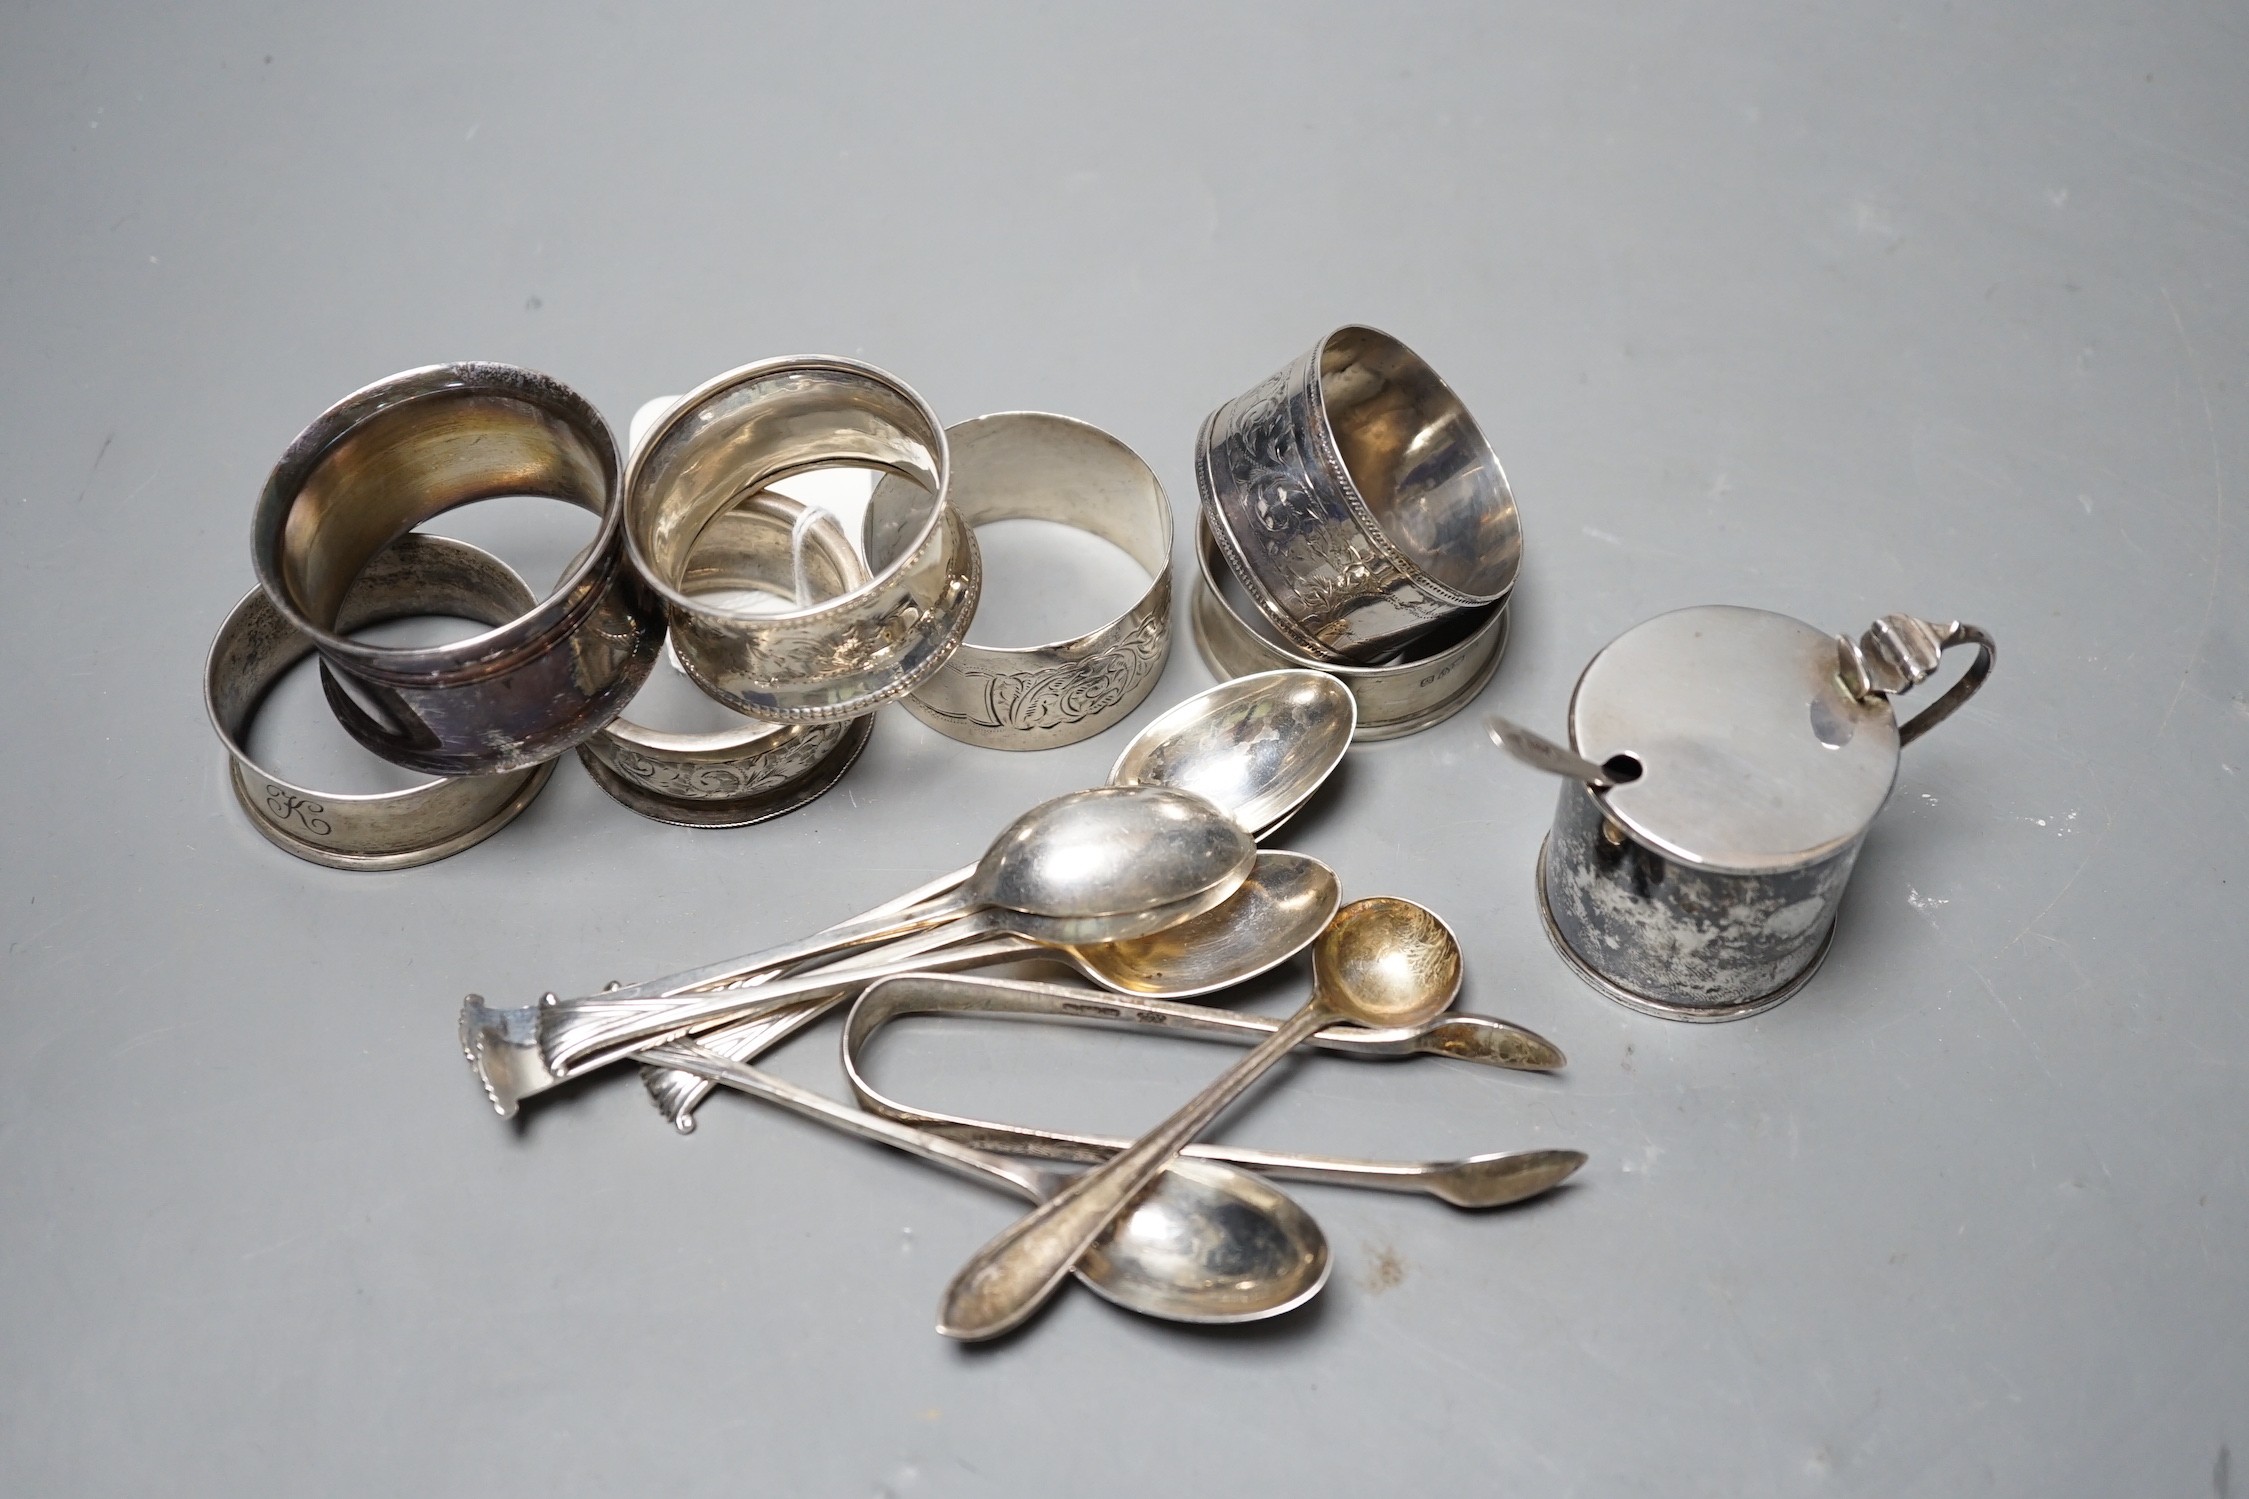 An Edwardian silver mustard pot, Birmingham, 1905, a set of six 'Onslow' pattern silver teaspoons by William Hutton & Sons, London, 1903, a pair of silver sugar tongs, a silver condiment spoons, six assorted silver napki